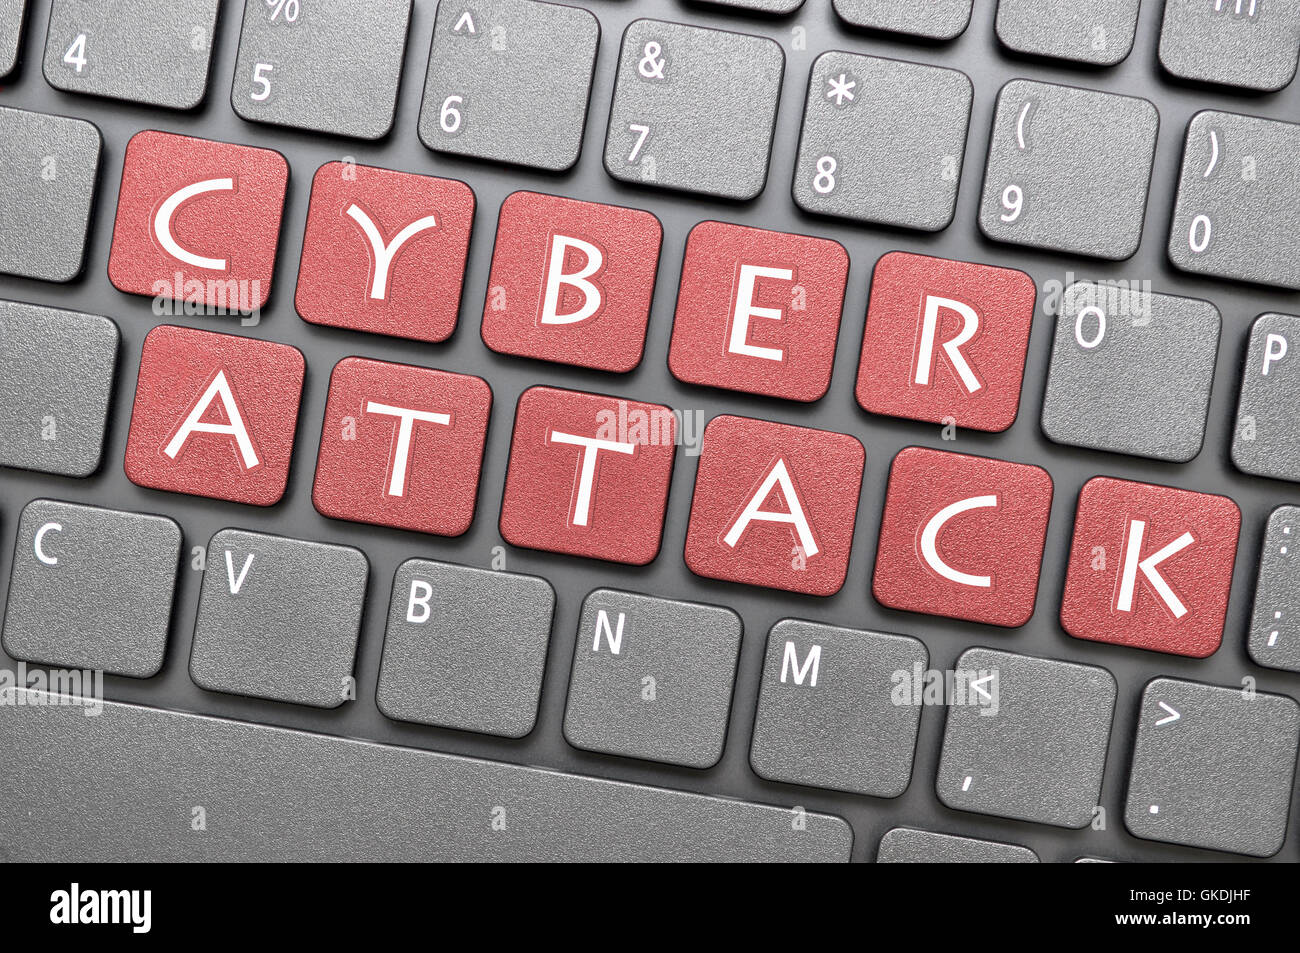 Red cyber attack key on keyboard Stock Photo